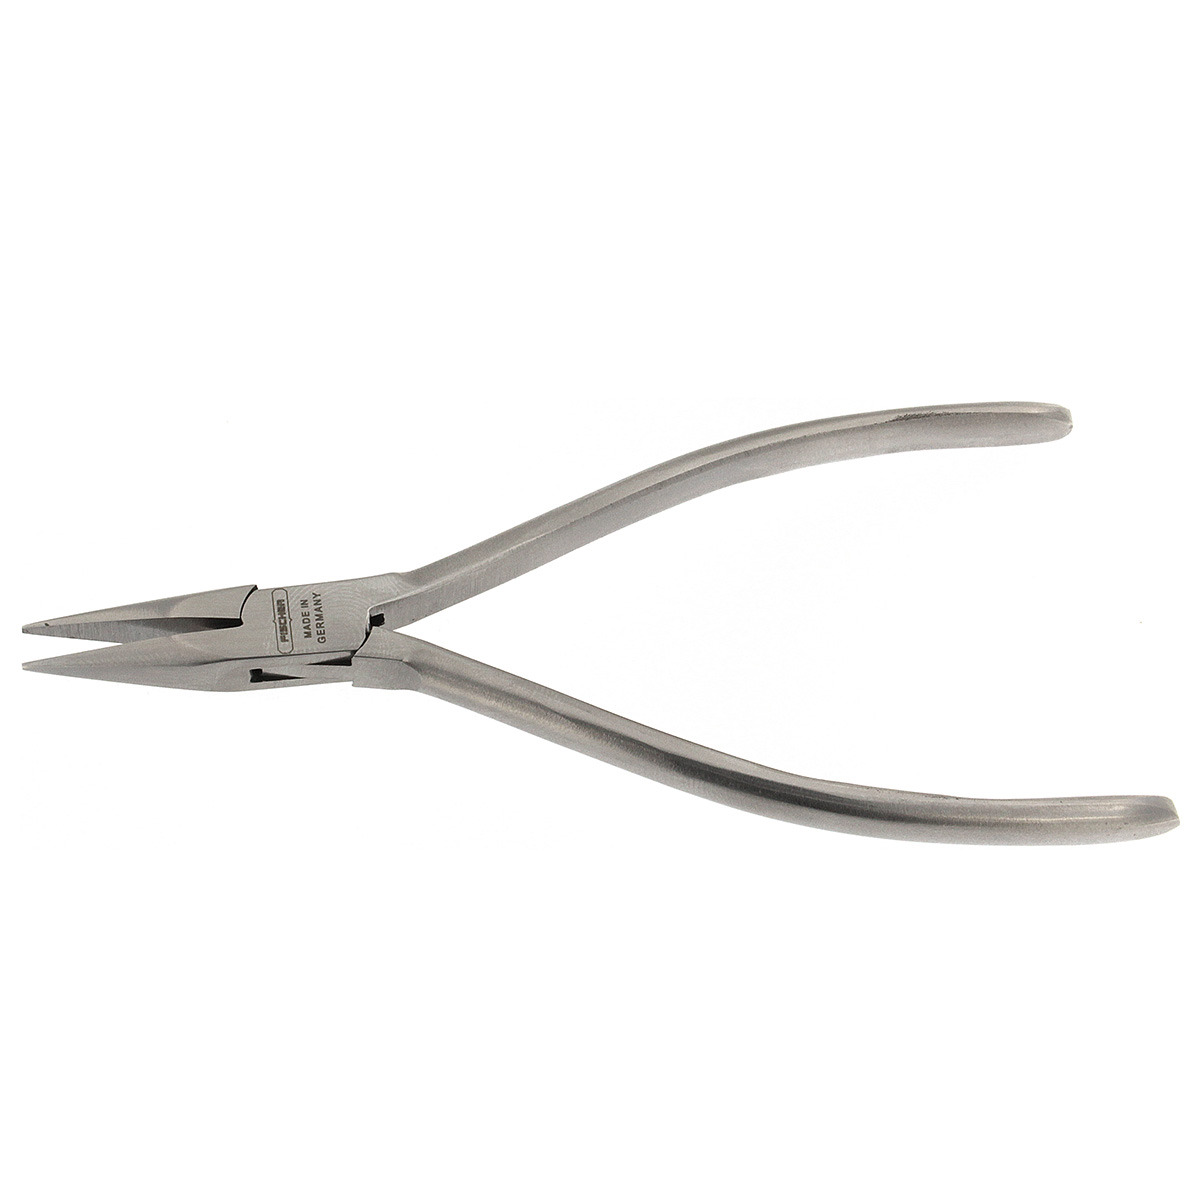 Chain nose pliers without cut, length 120 mm